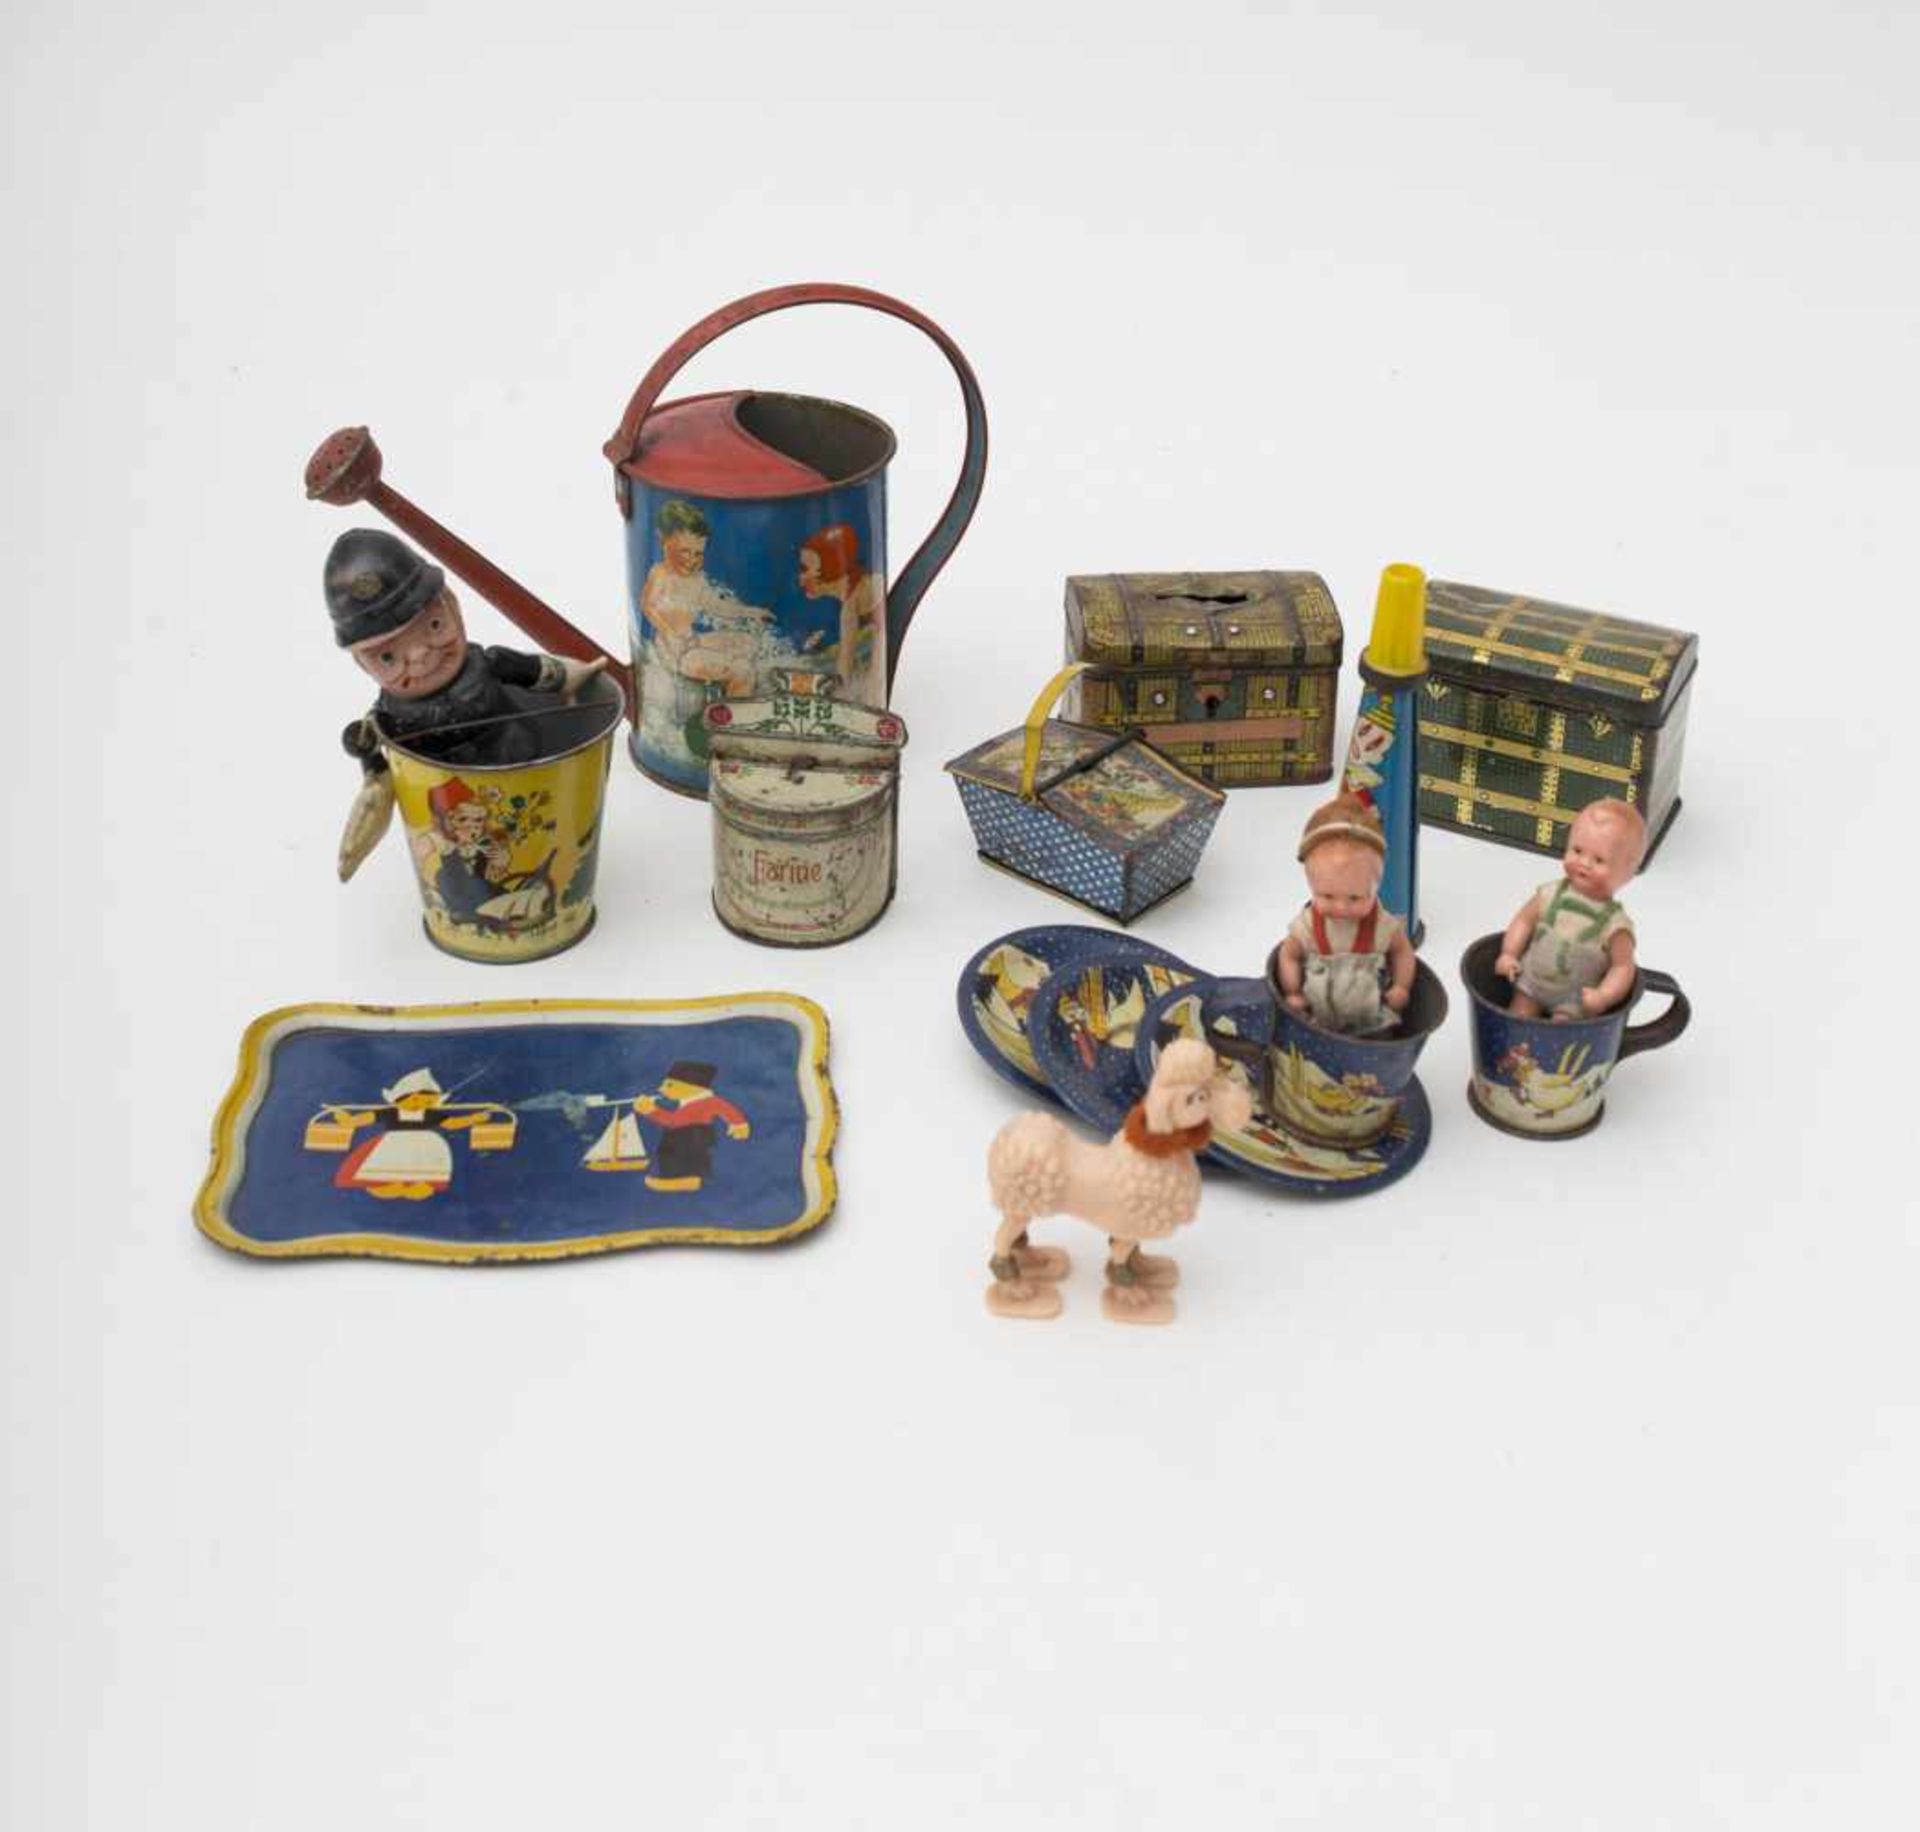 Set of various doll accessories Lithographed metal, includes a watering can – small trunks – piggy